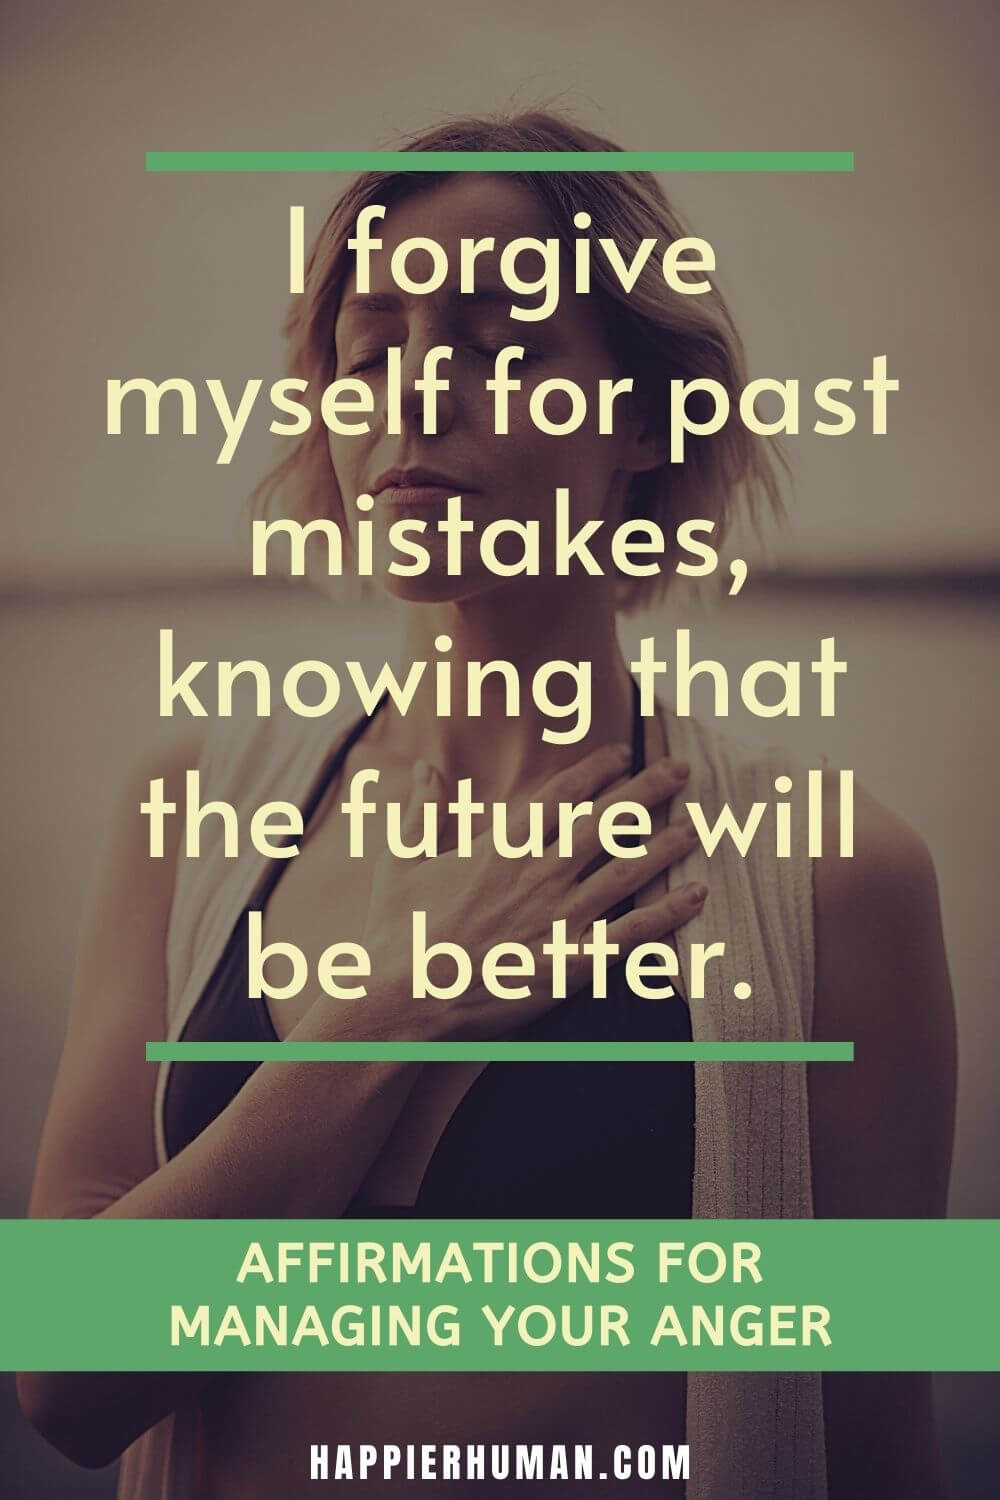 Affirmations for Anger - I forgive myself for past mistakes, knowing that the future will be better. | calming mantras for anger | affirmations for releasing resentment | how to release anger physically